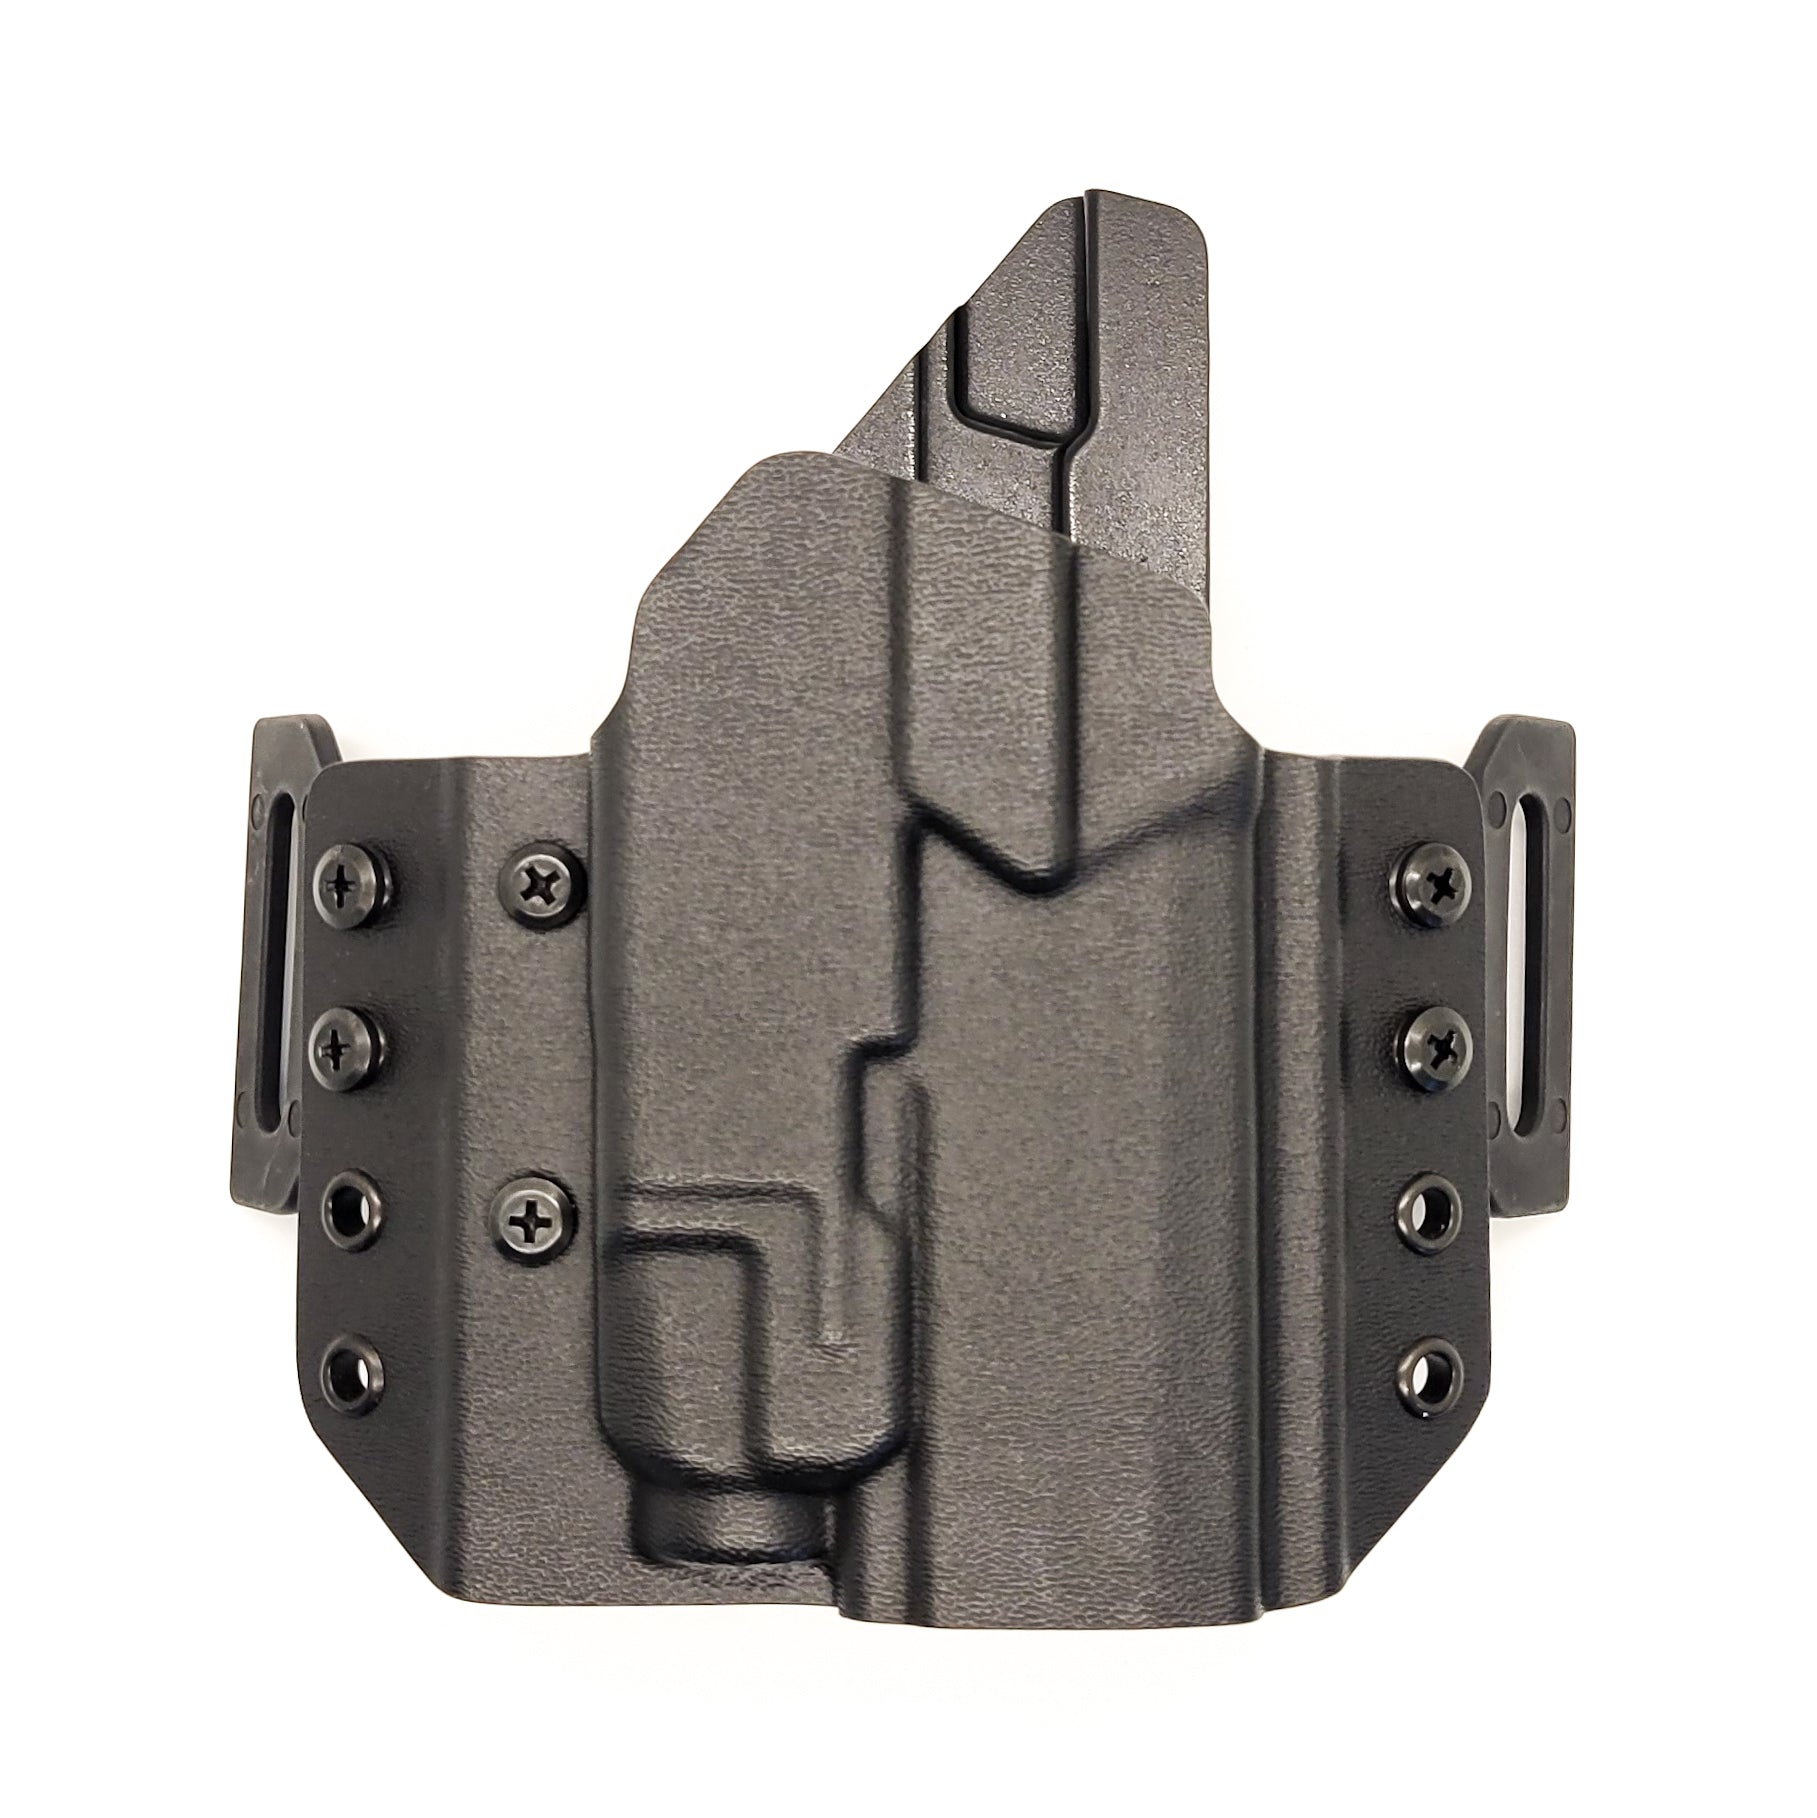 Outside Waistband Pancake Style Kydex holster designed to fit the Sig Sauer P320 Compact, Carry & M18 with the Streamlight TLR-7 or TLR-7A. Full sweat guard, adjustable retention, open muzzle cleared for a red dot sight. Proudly made in the USA for veterans & law enforcement. TLR7 TLR7A P 320 X-Carry XCarry XCompact